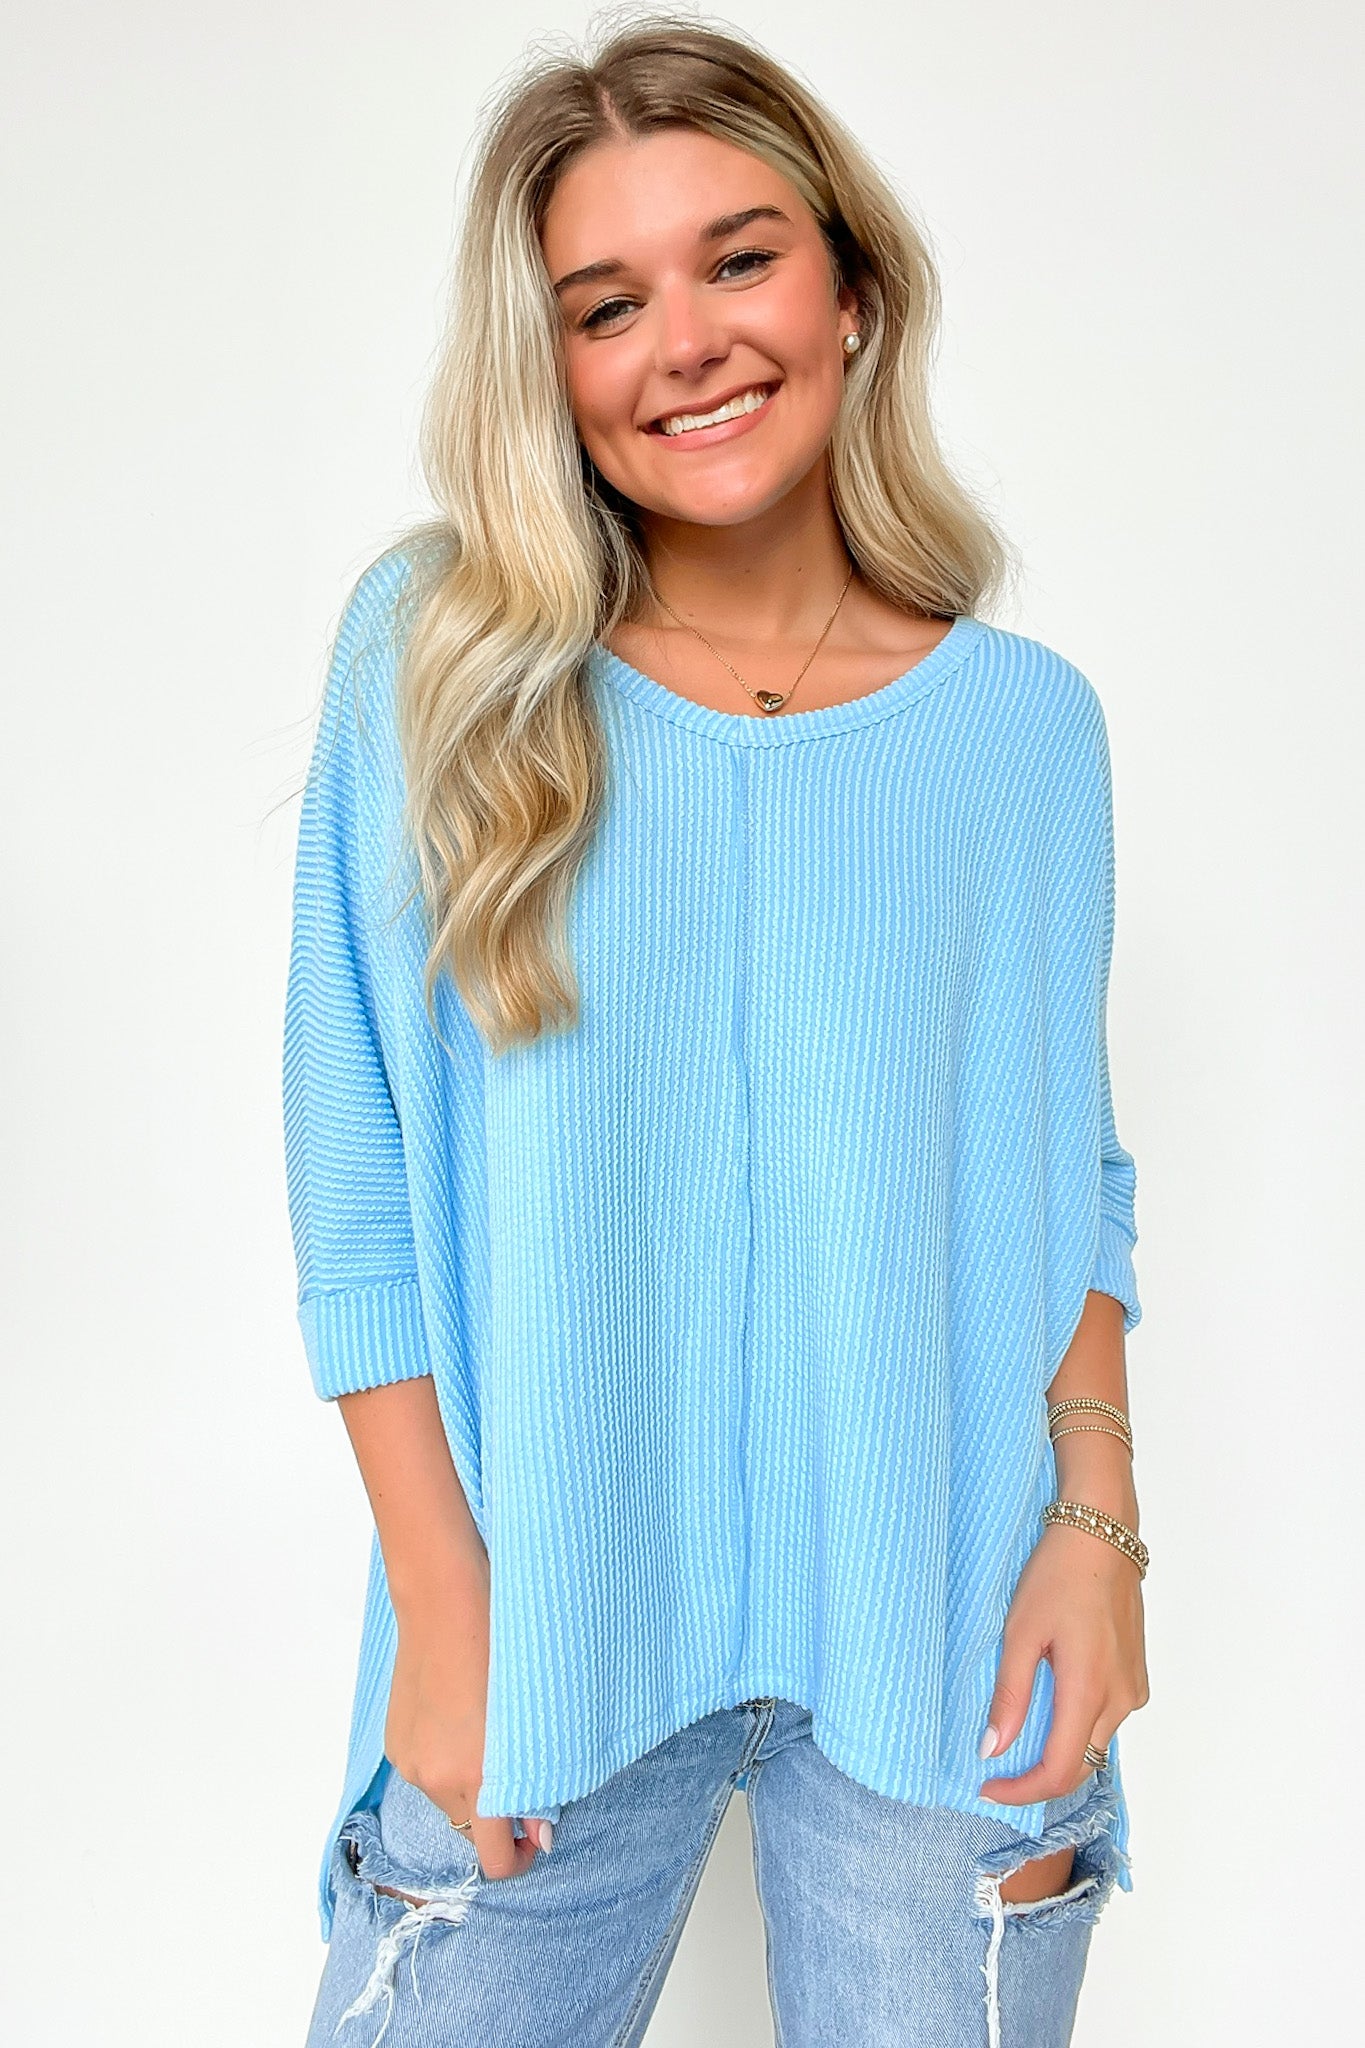 Spring Blue / SM Rhysa Textured Knit V-Neck Top - BACK IN STOCK - Madison and Mallory